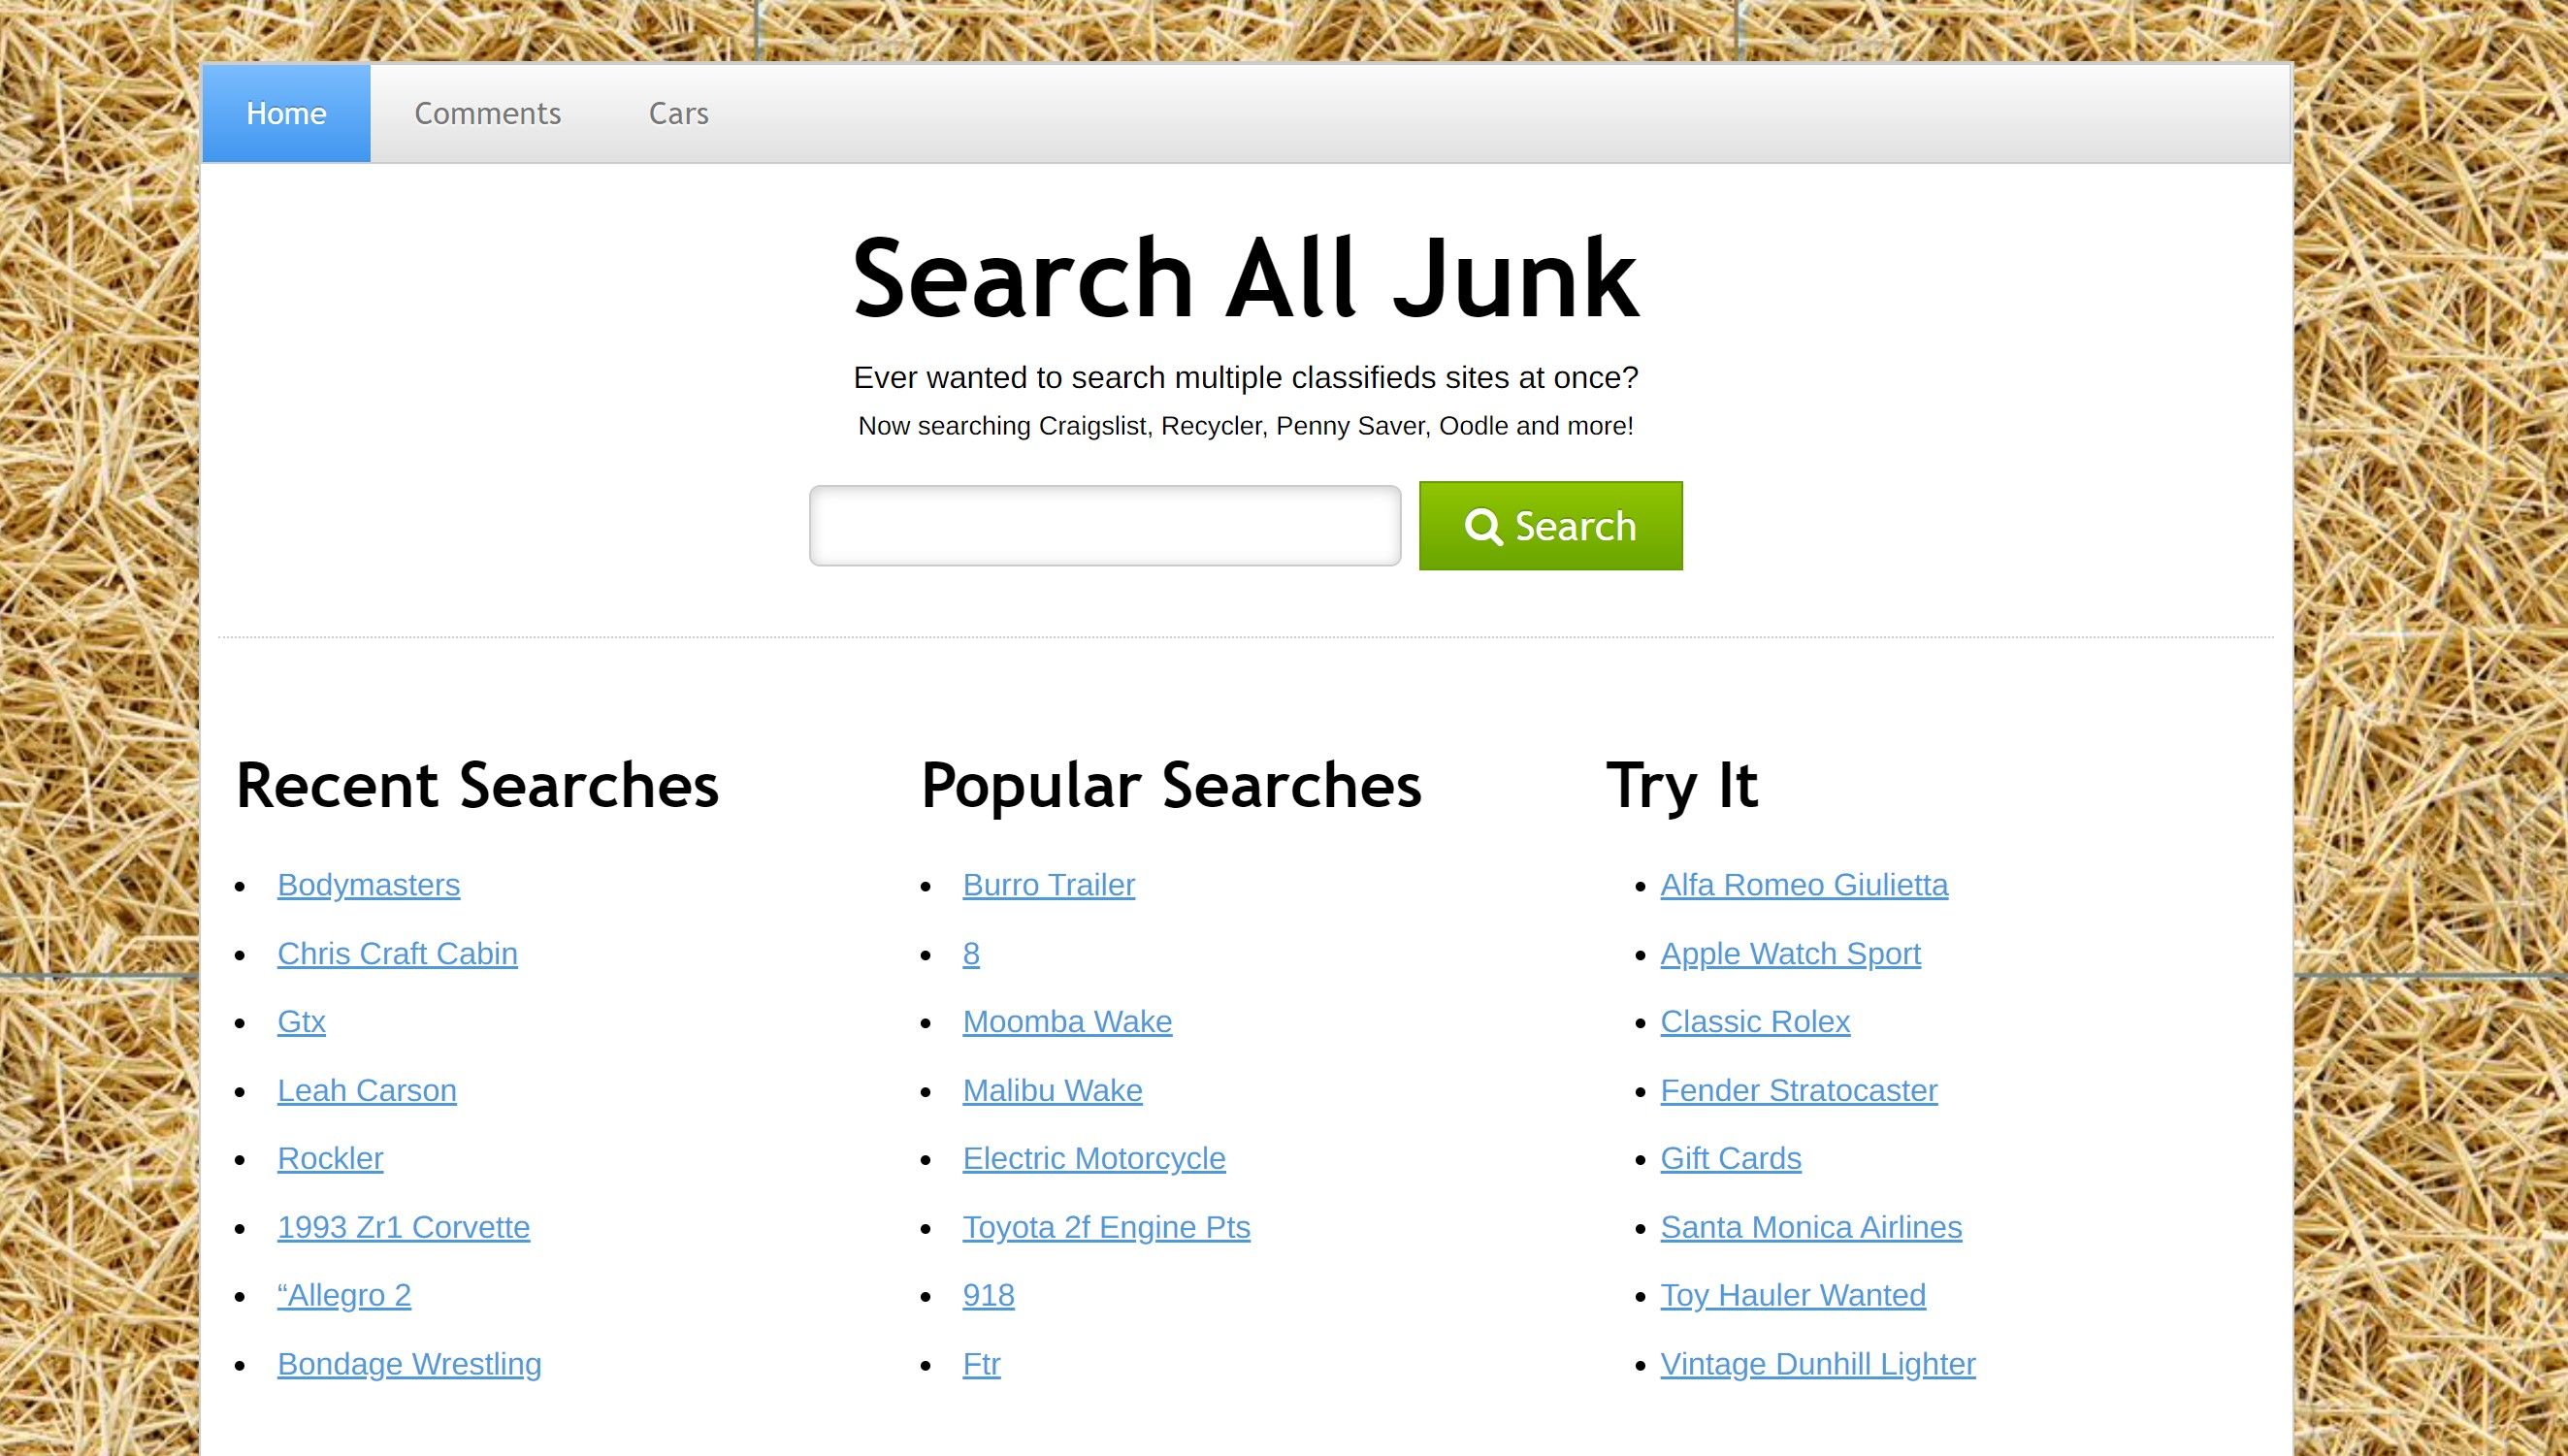 Search All Junk homepage